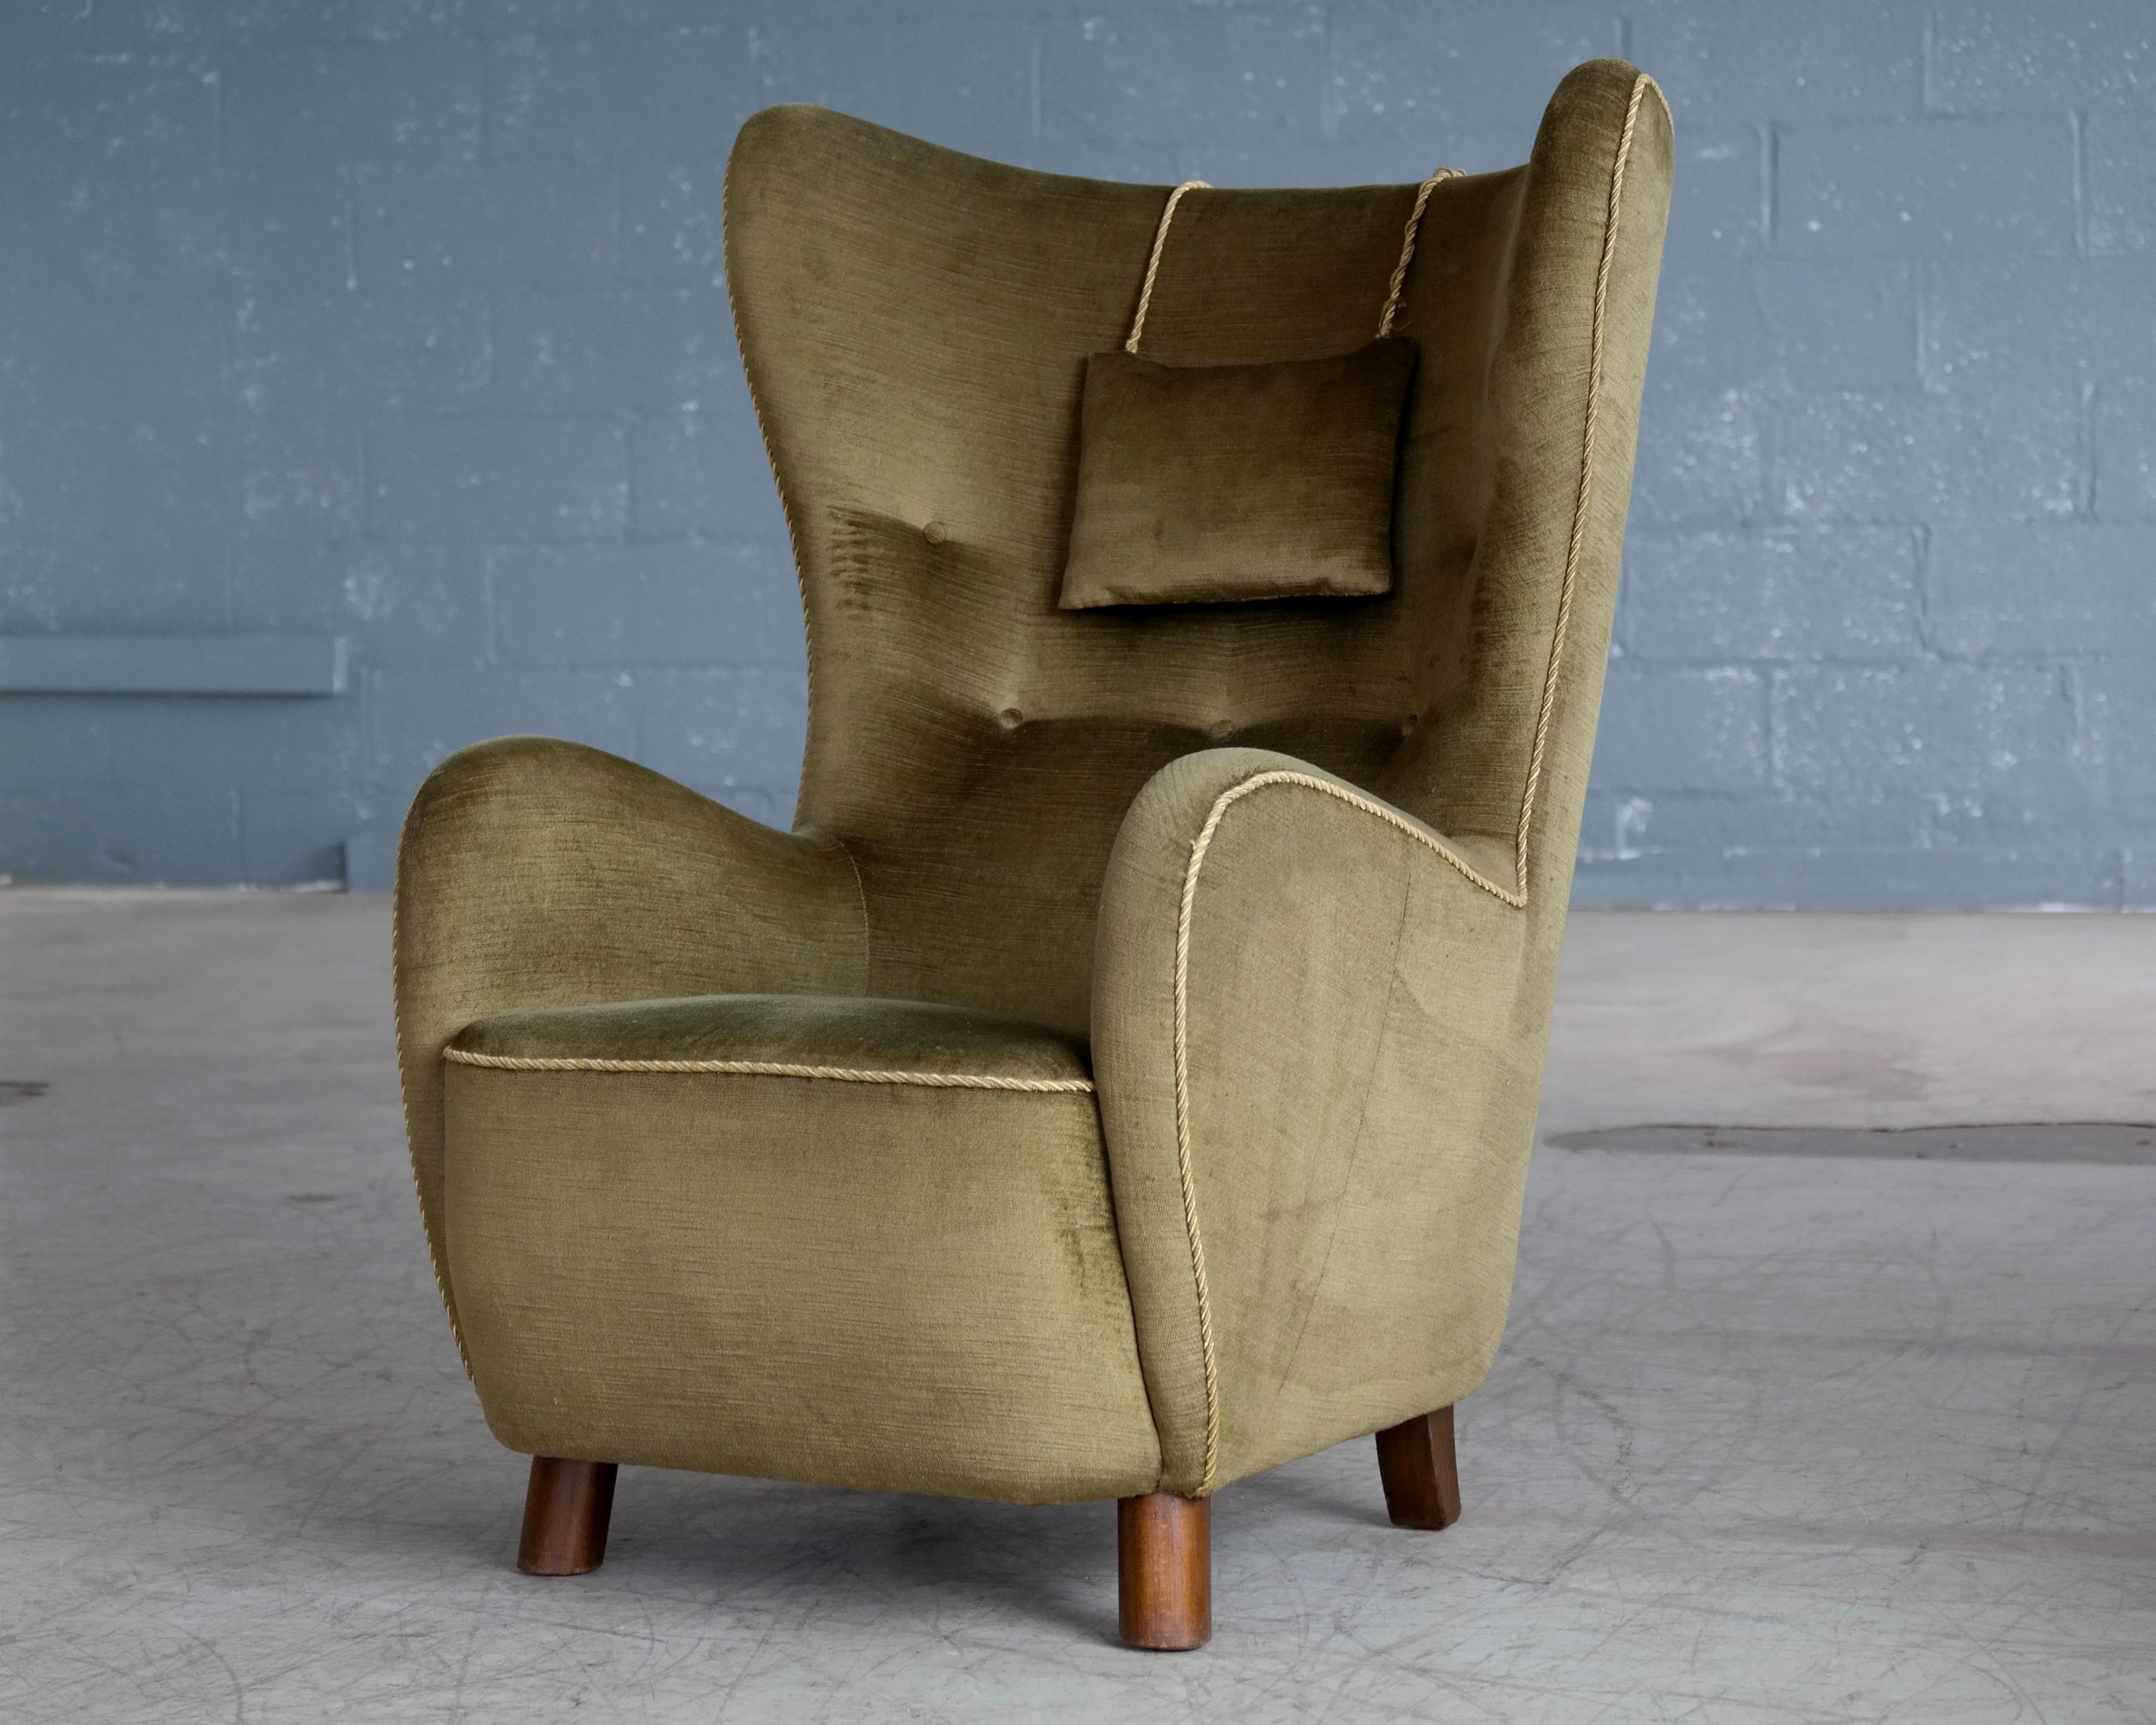 Wool Danish 1940s Flemming Lassen Attributed High Back Lounge Chair